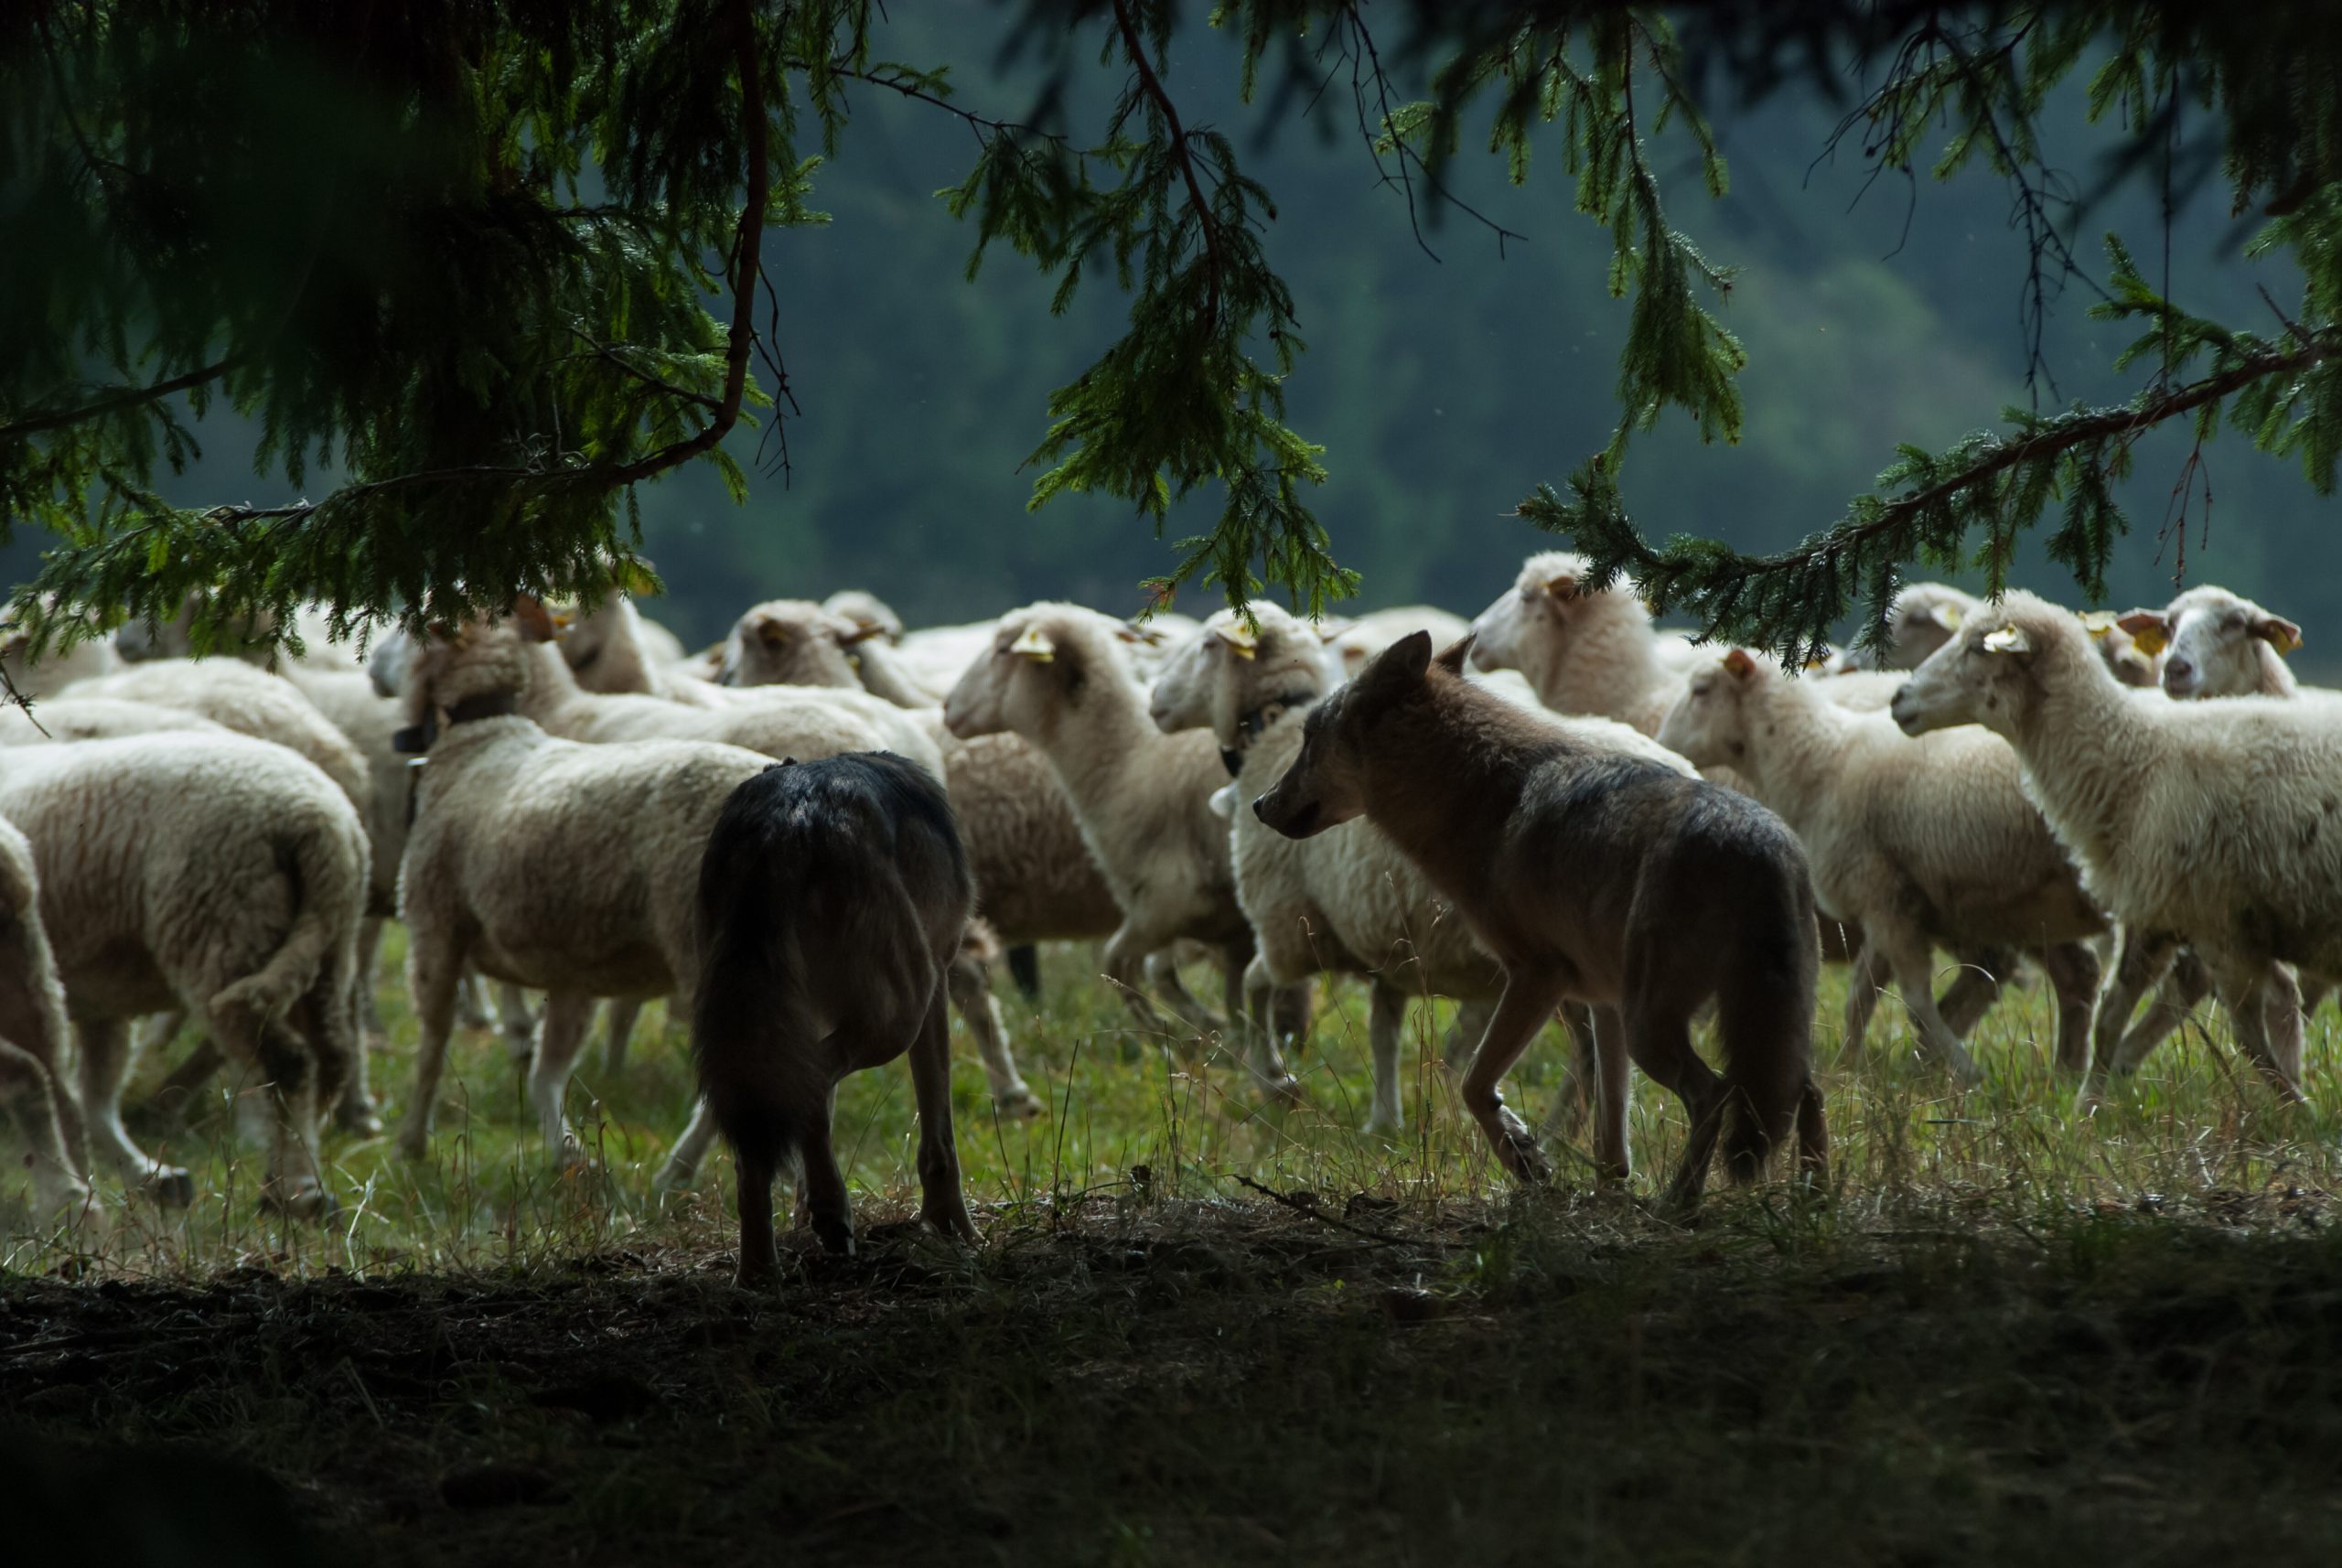 wolves walking along a herd of sheep